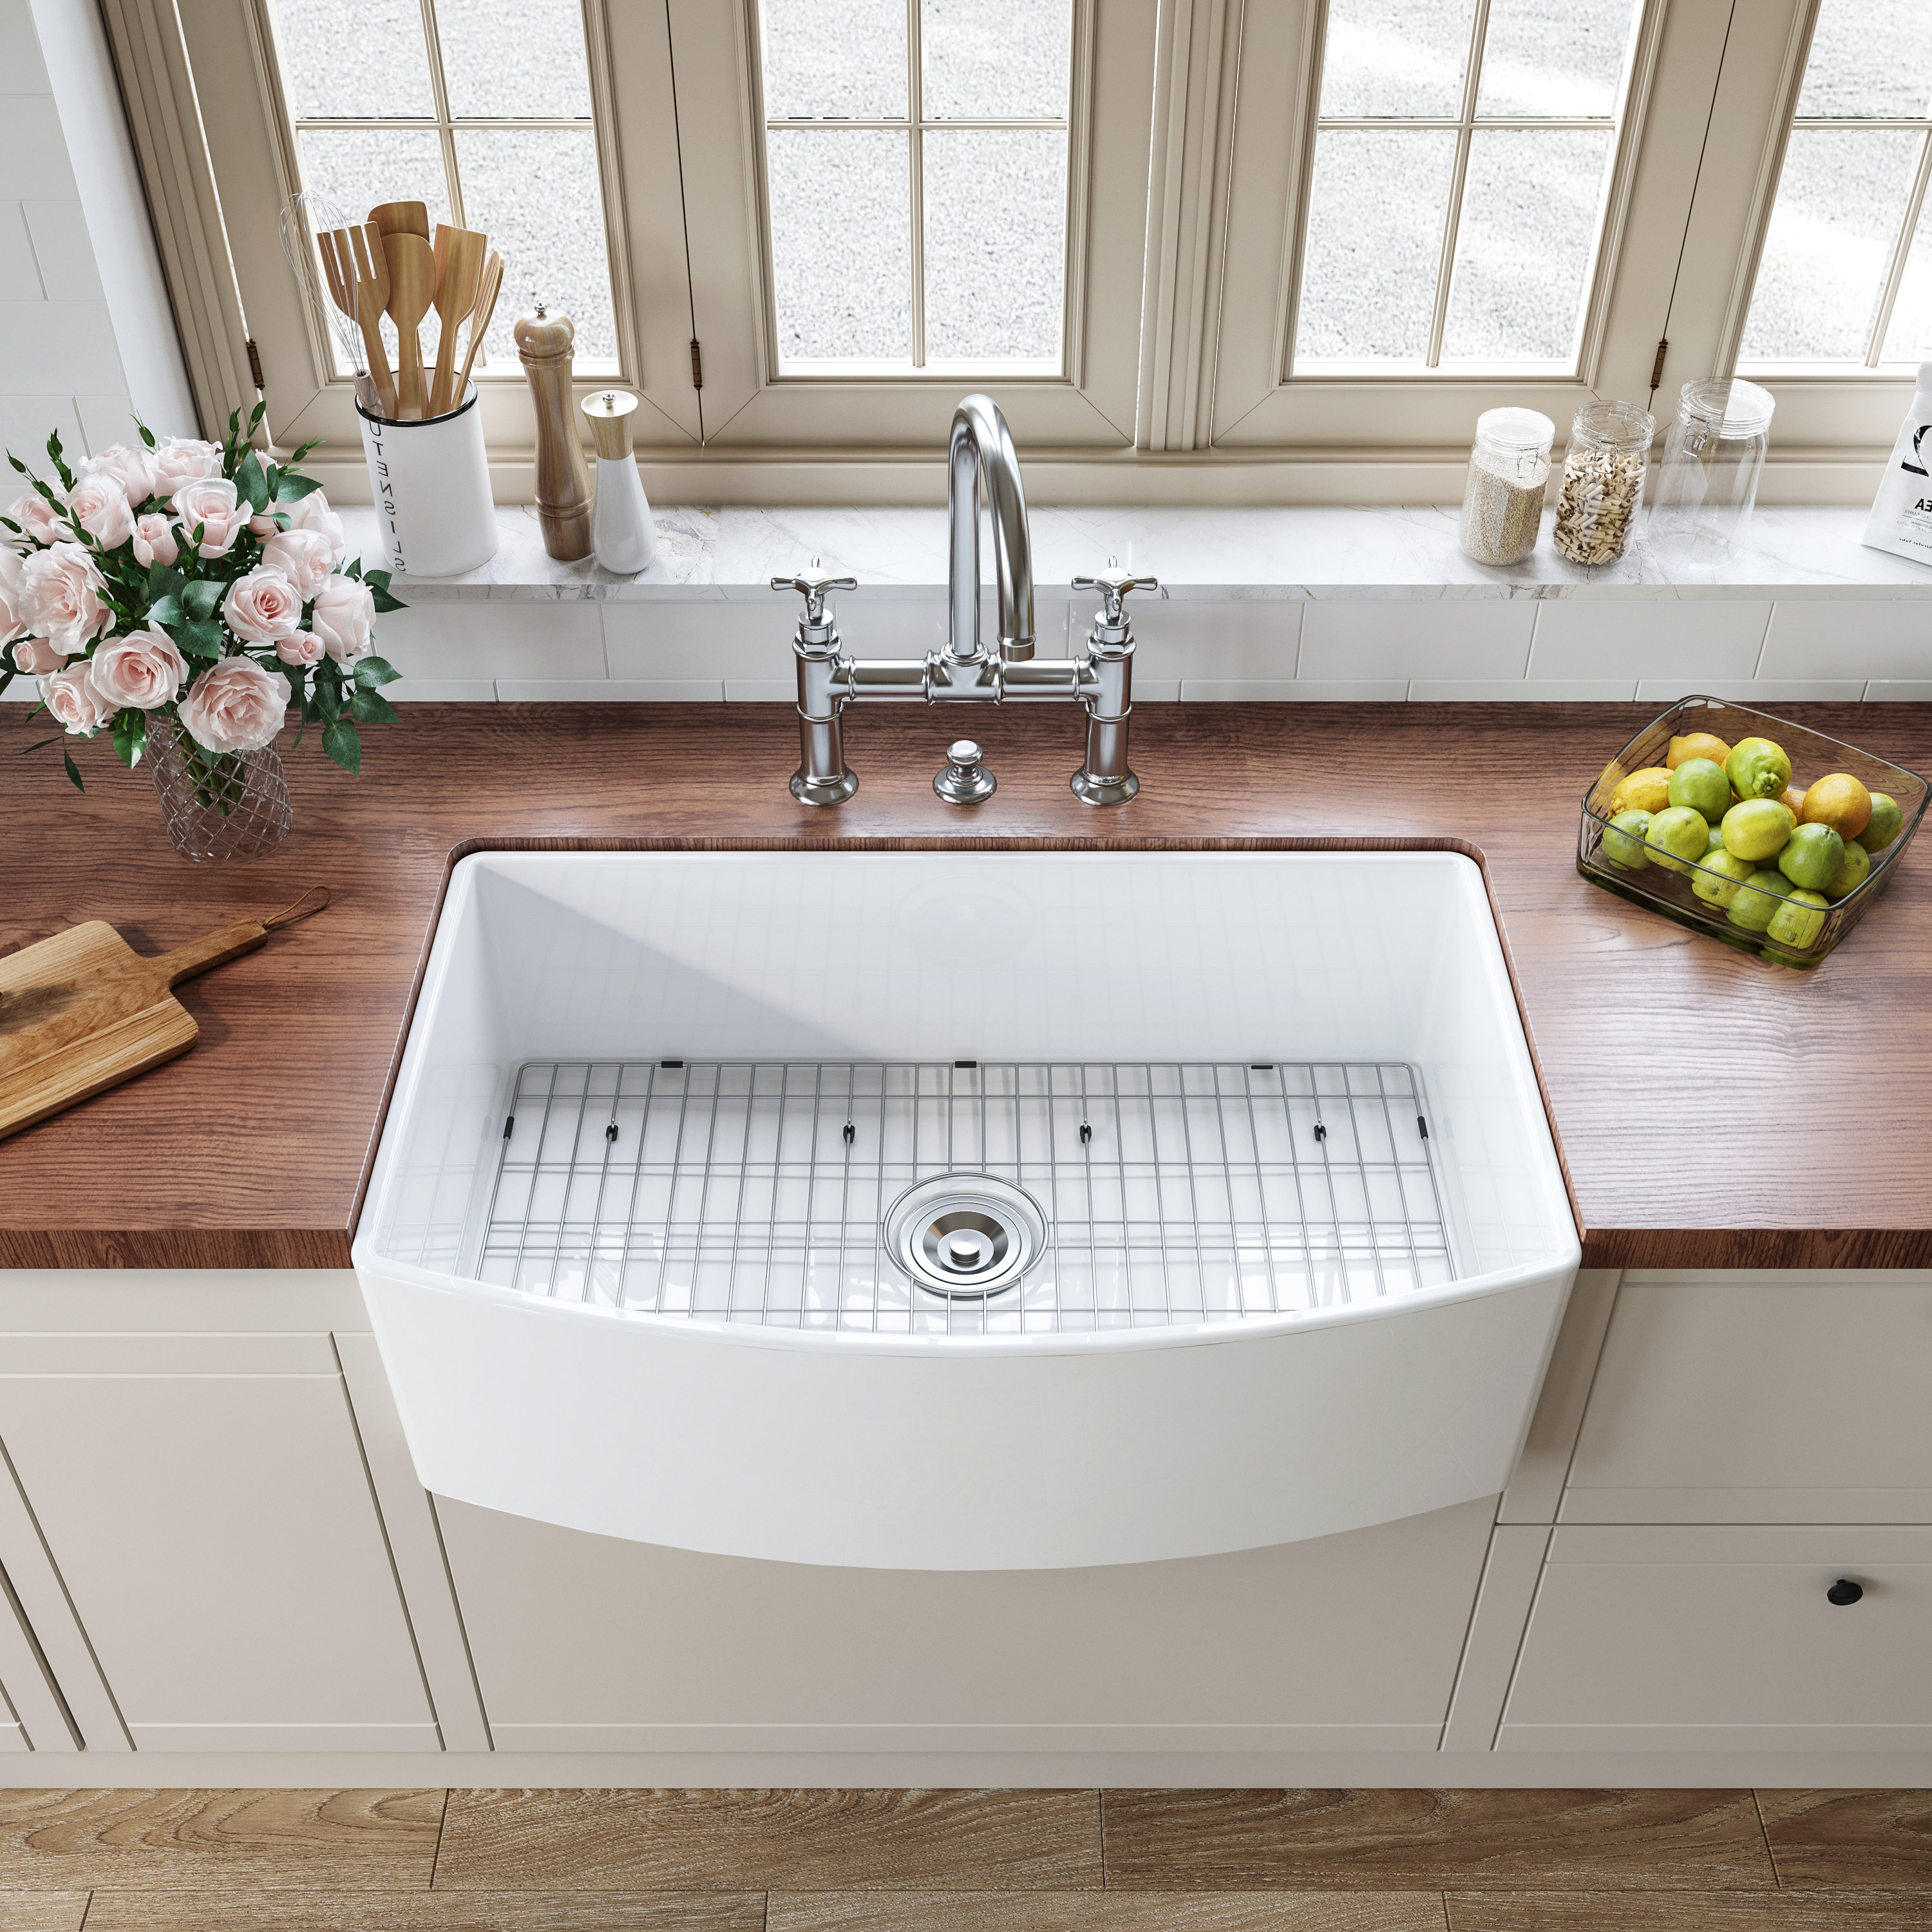 DeerValley 33 in. Farmhouse/Apron-Front Double Bowl White Fireclay Workstation Kitchen Sink with Grid and Basket Strainer